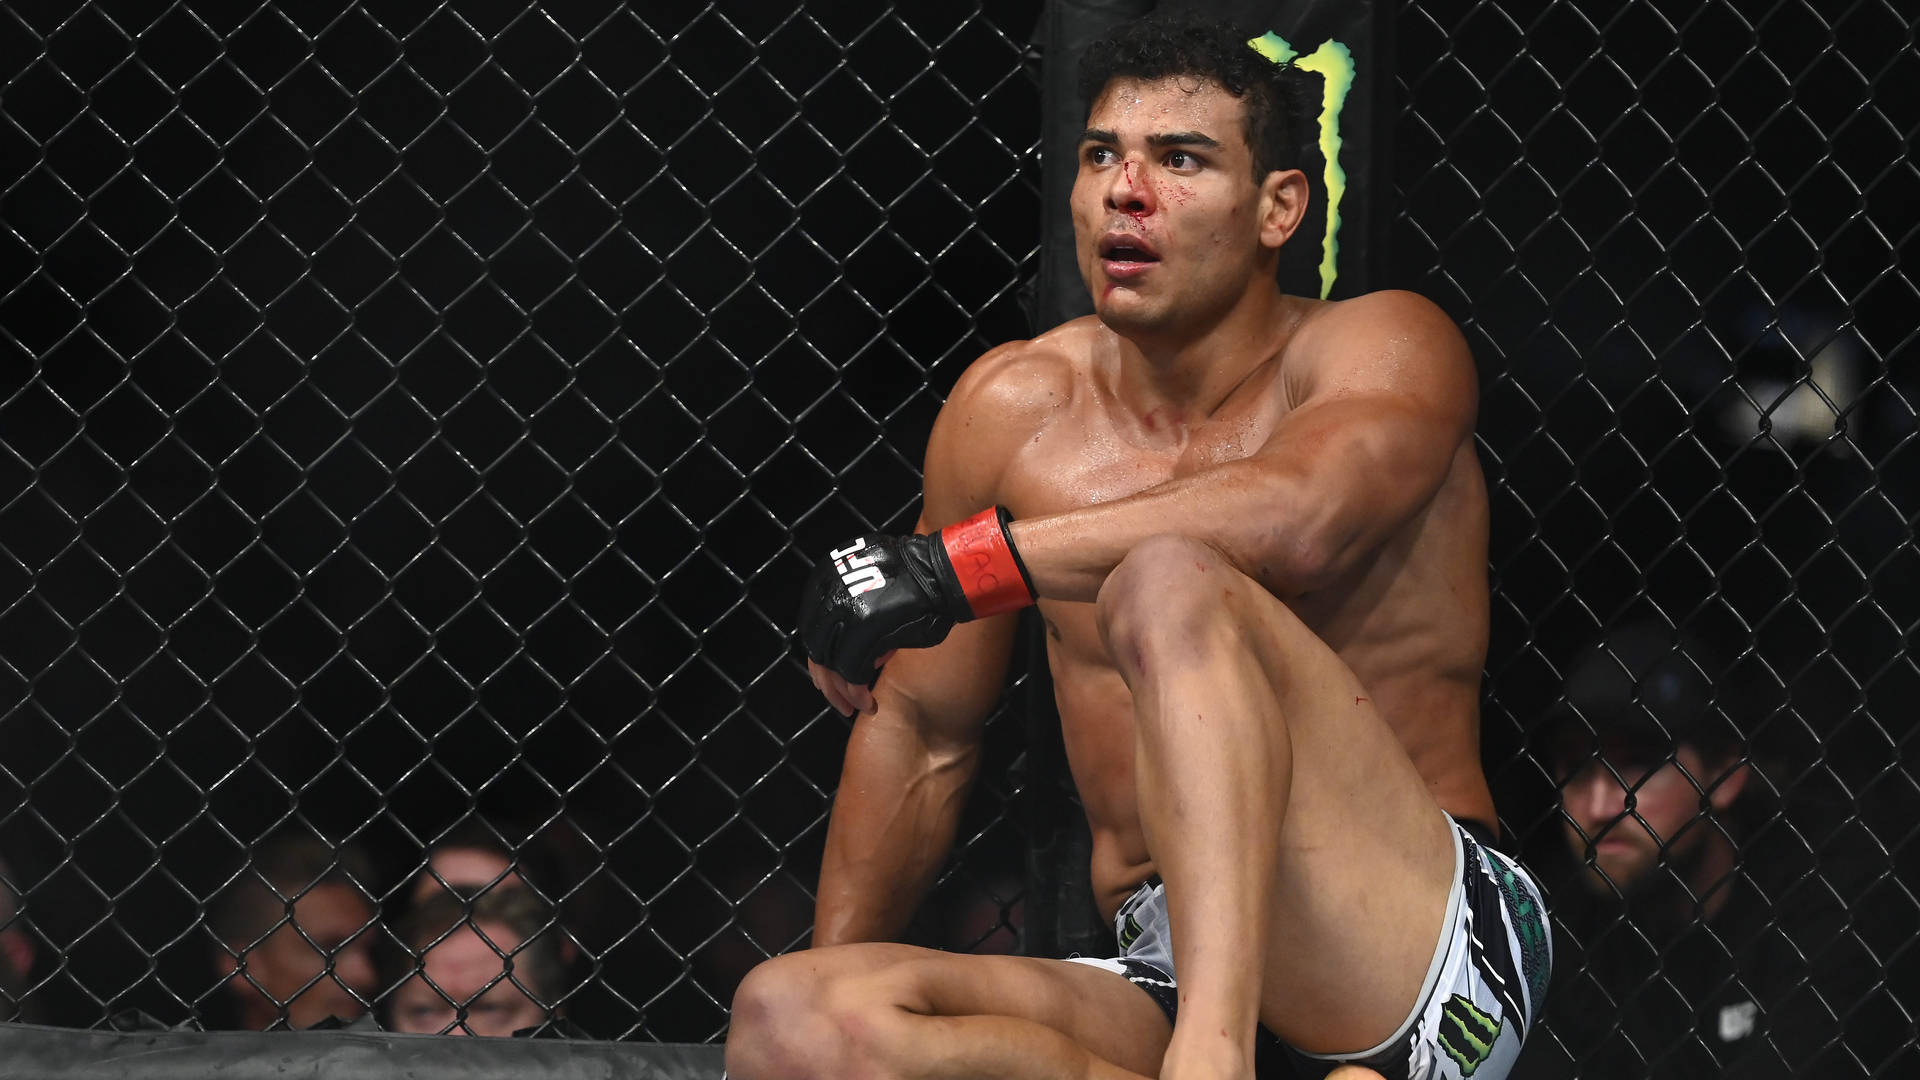 Caption: Intense Post Fight Moment with Paulo Costa Wallpaper